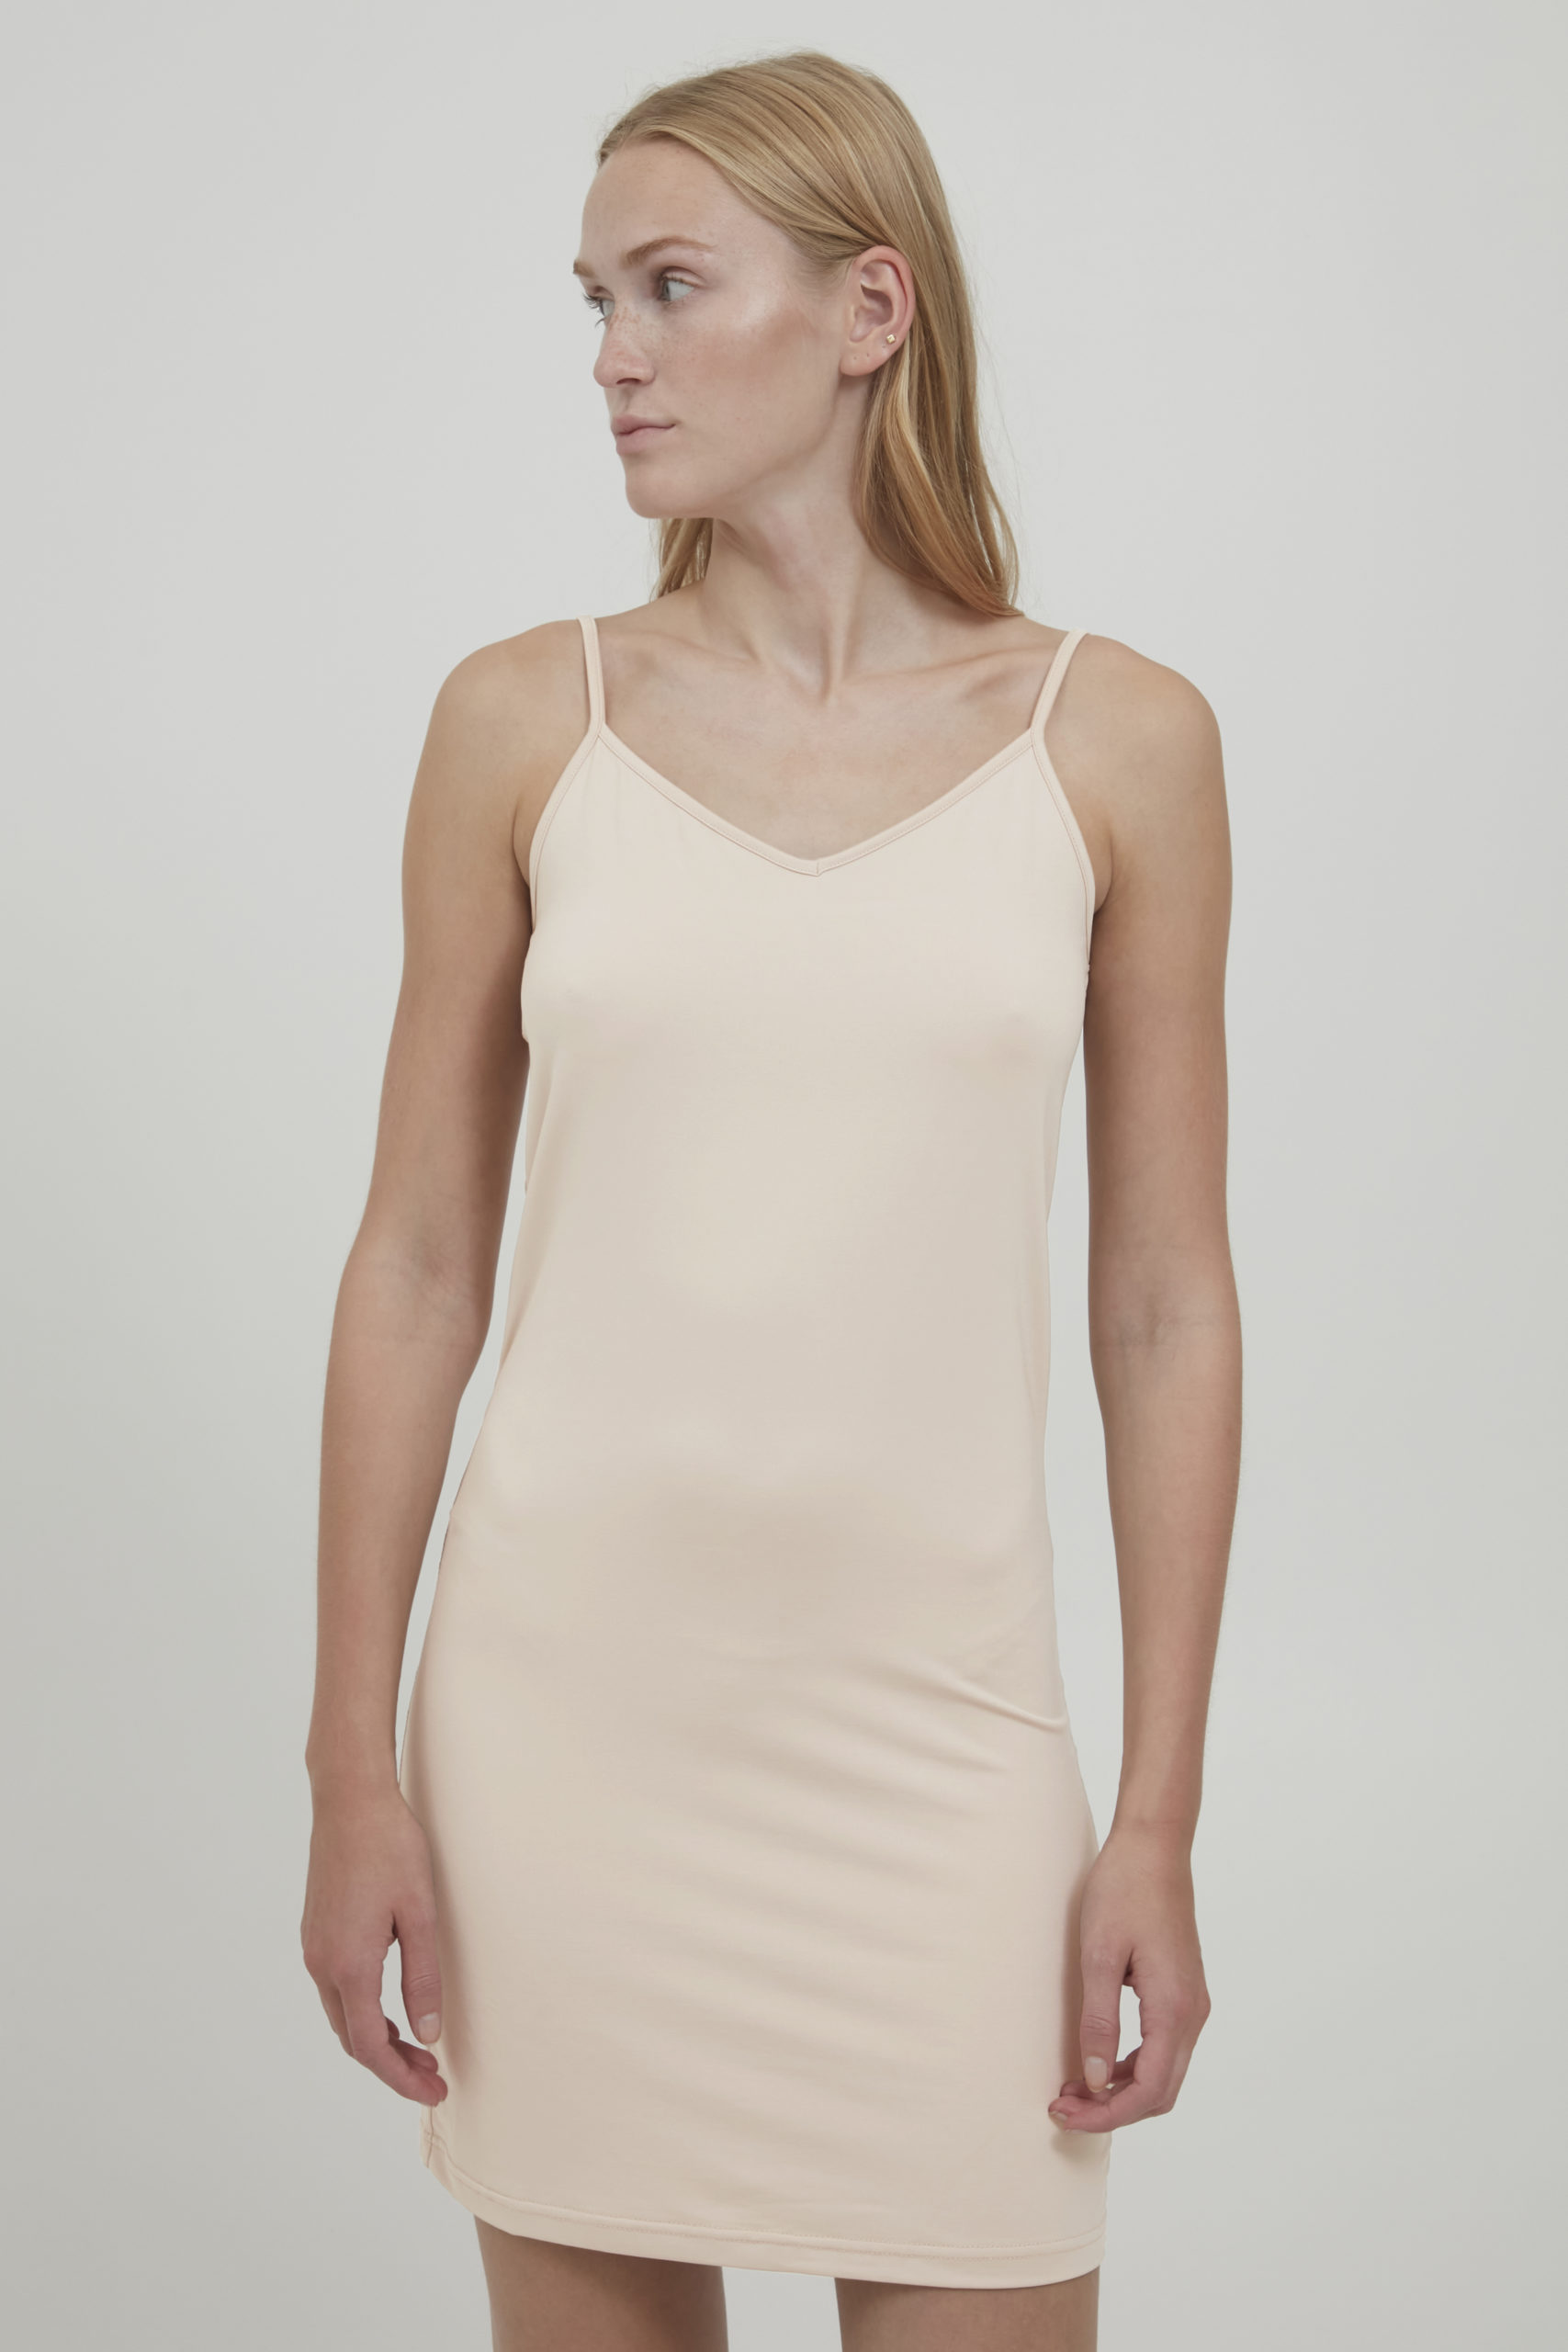 BYiane Underdress nude front